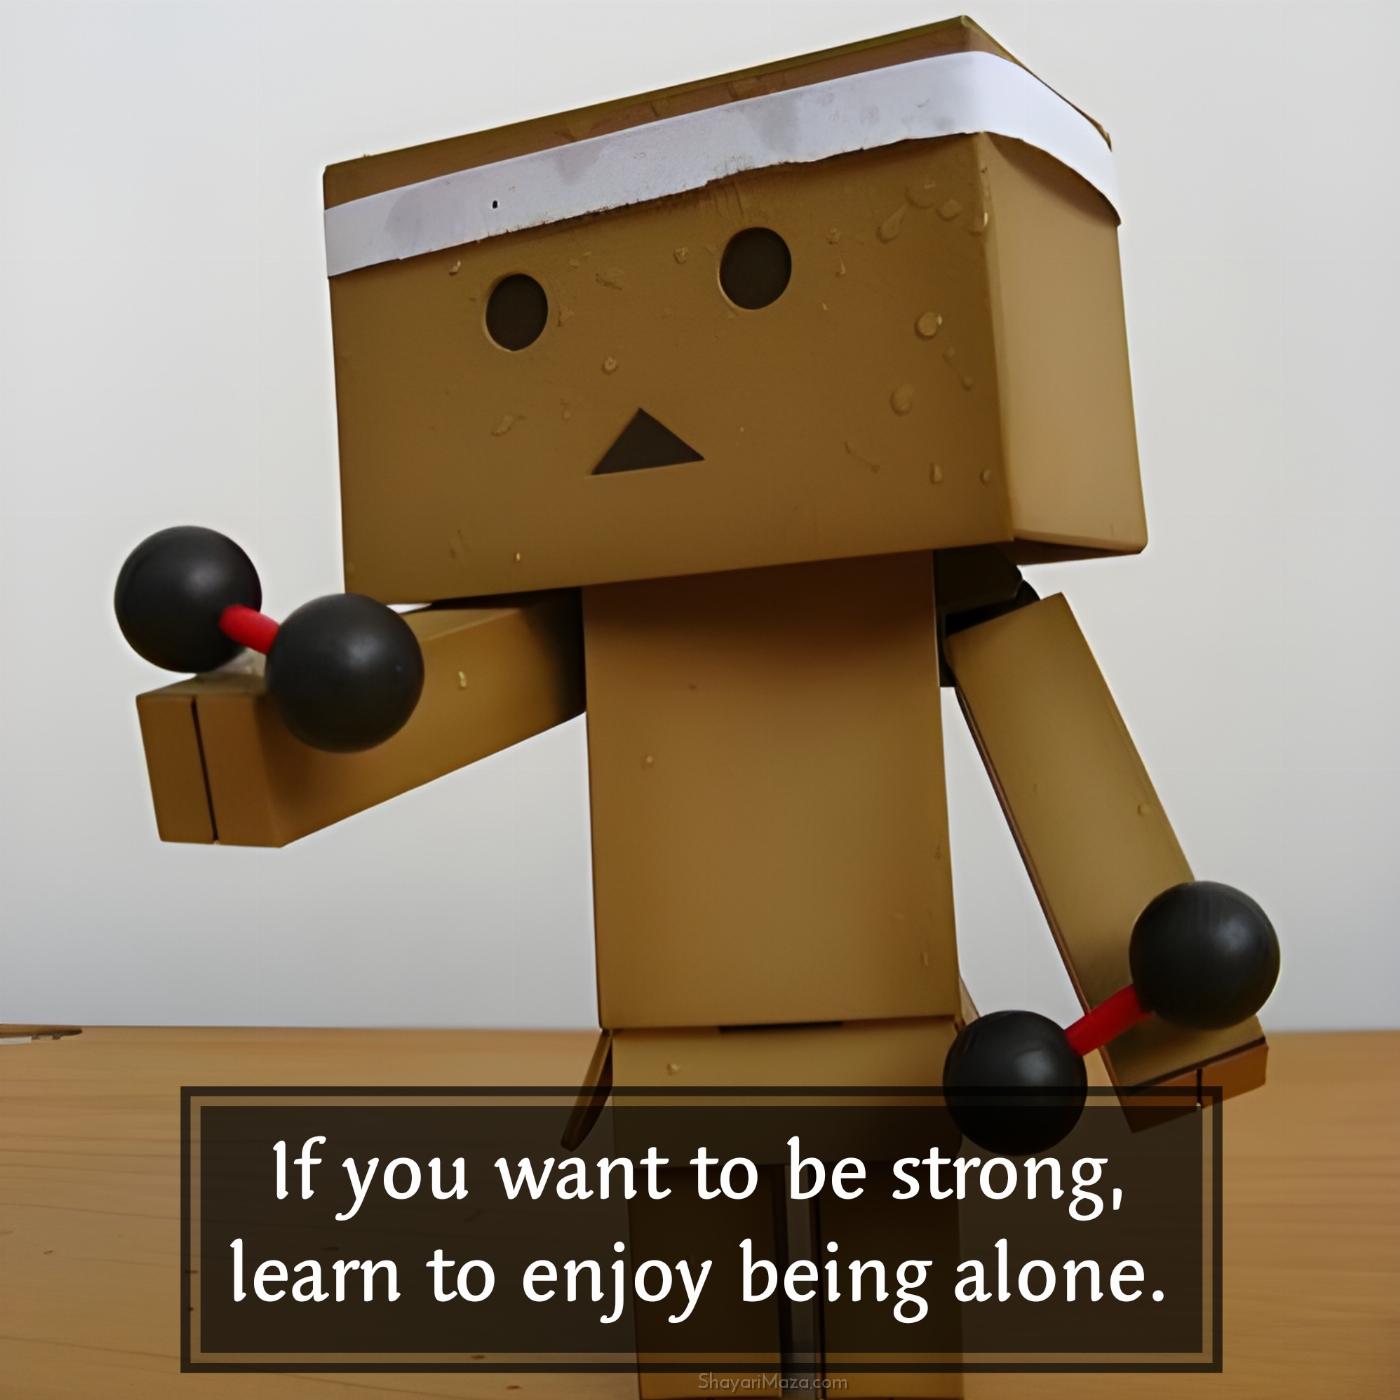 If you want to be strong learn to enjoy being alone